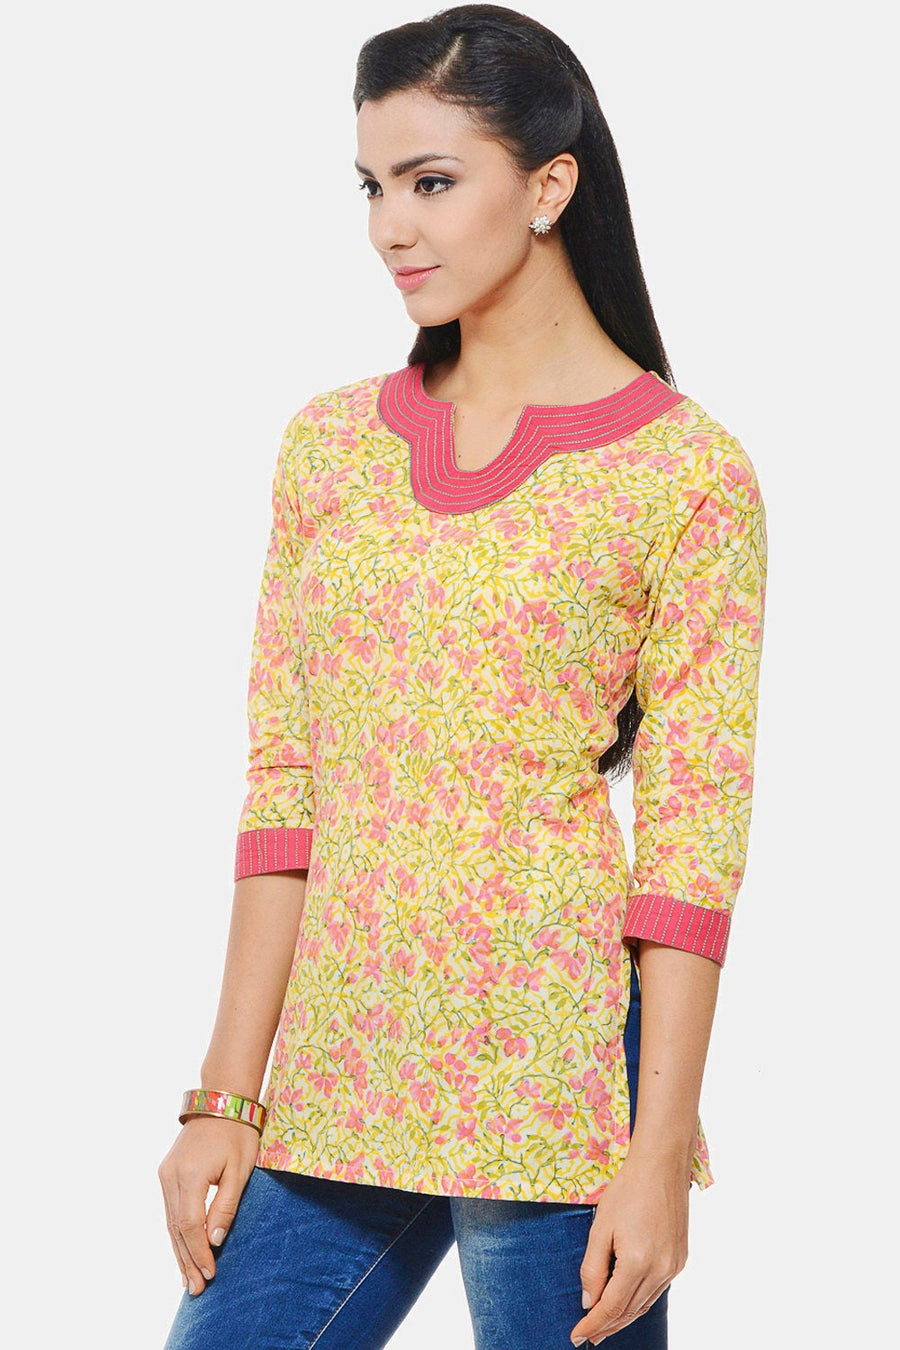 Hand Block printed Indian Kurti in yellow floral design with embroidery on neck and sleeves